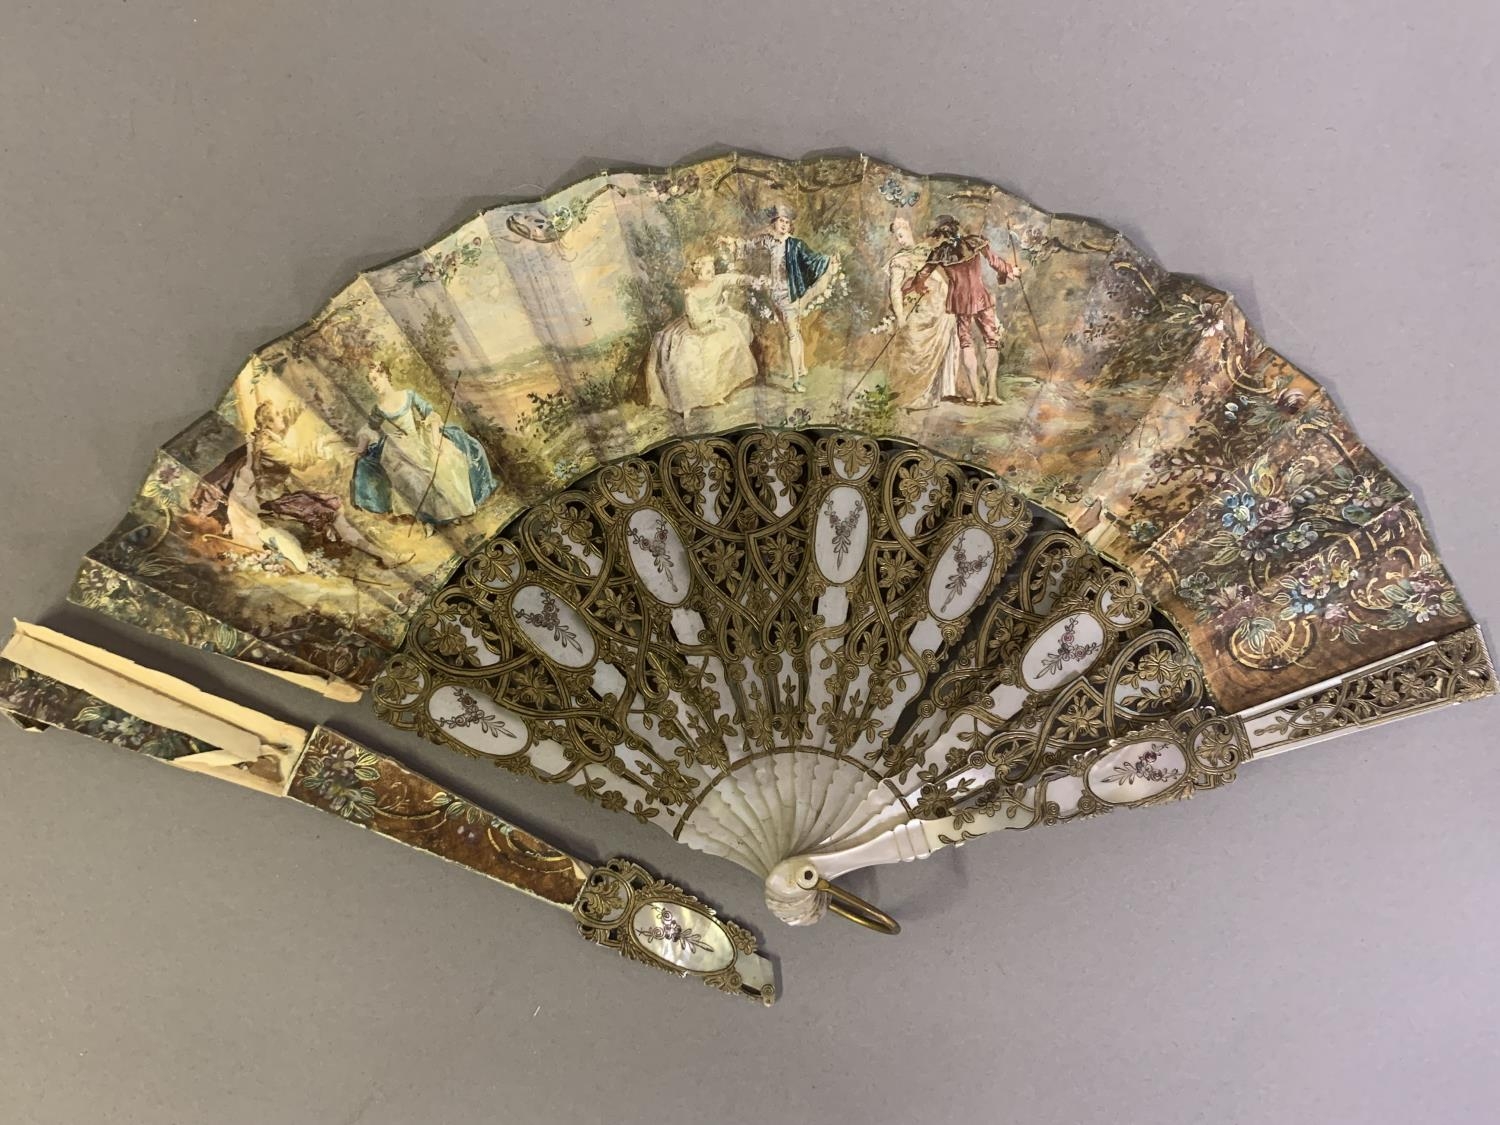 Three 20th century fans: the first, in white mother of pearl, a pastiche of an 18th century fan, the - Image 6 of 9